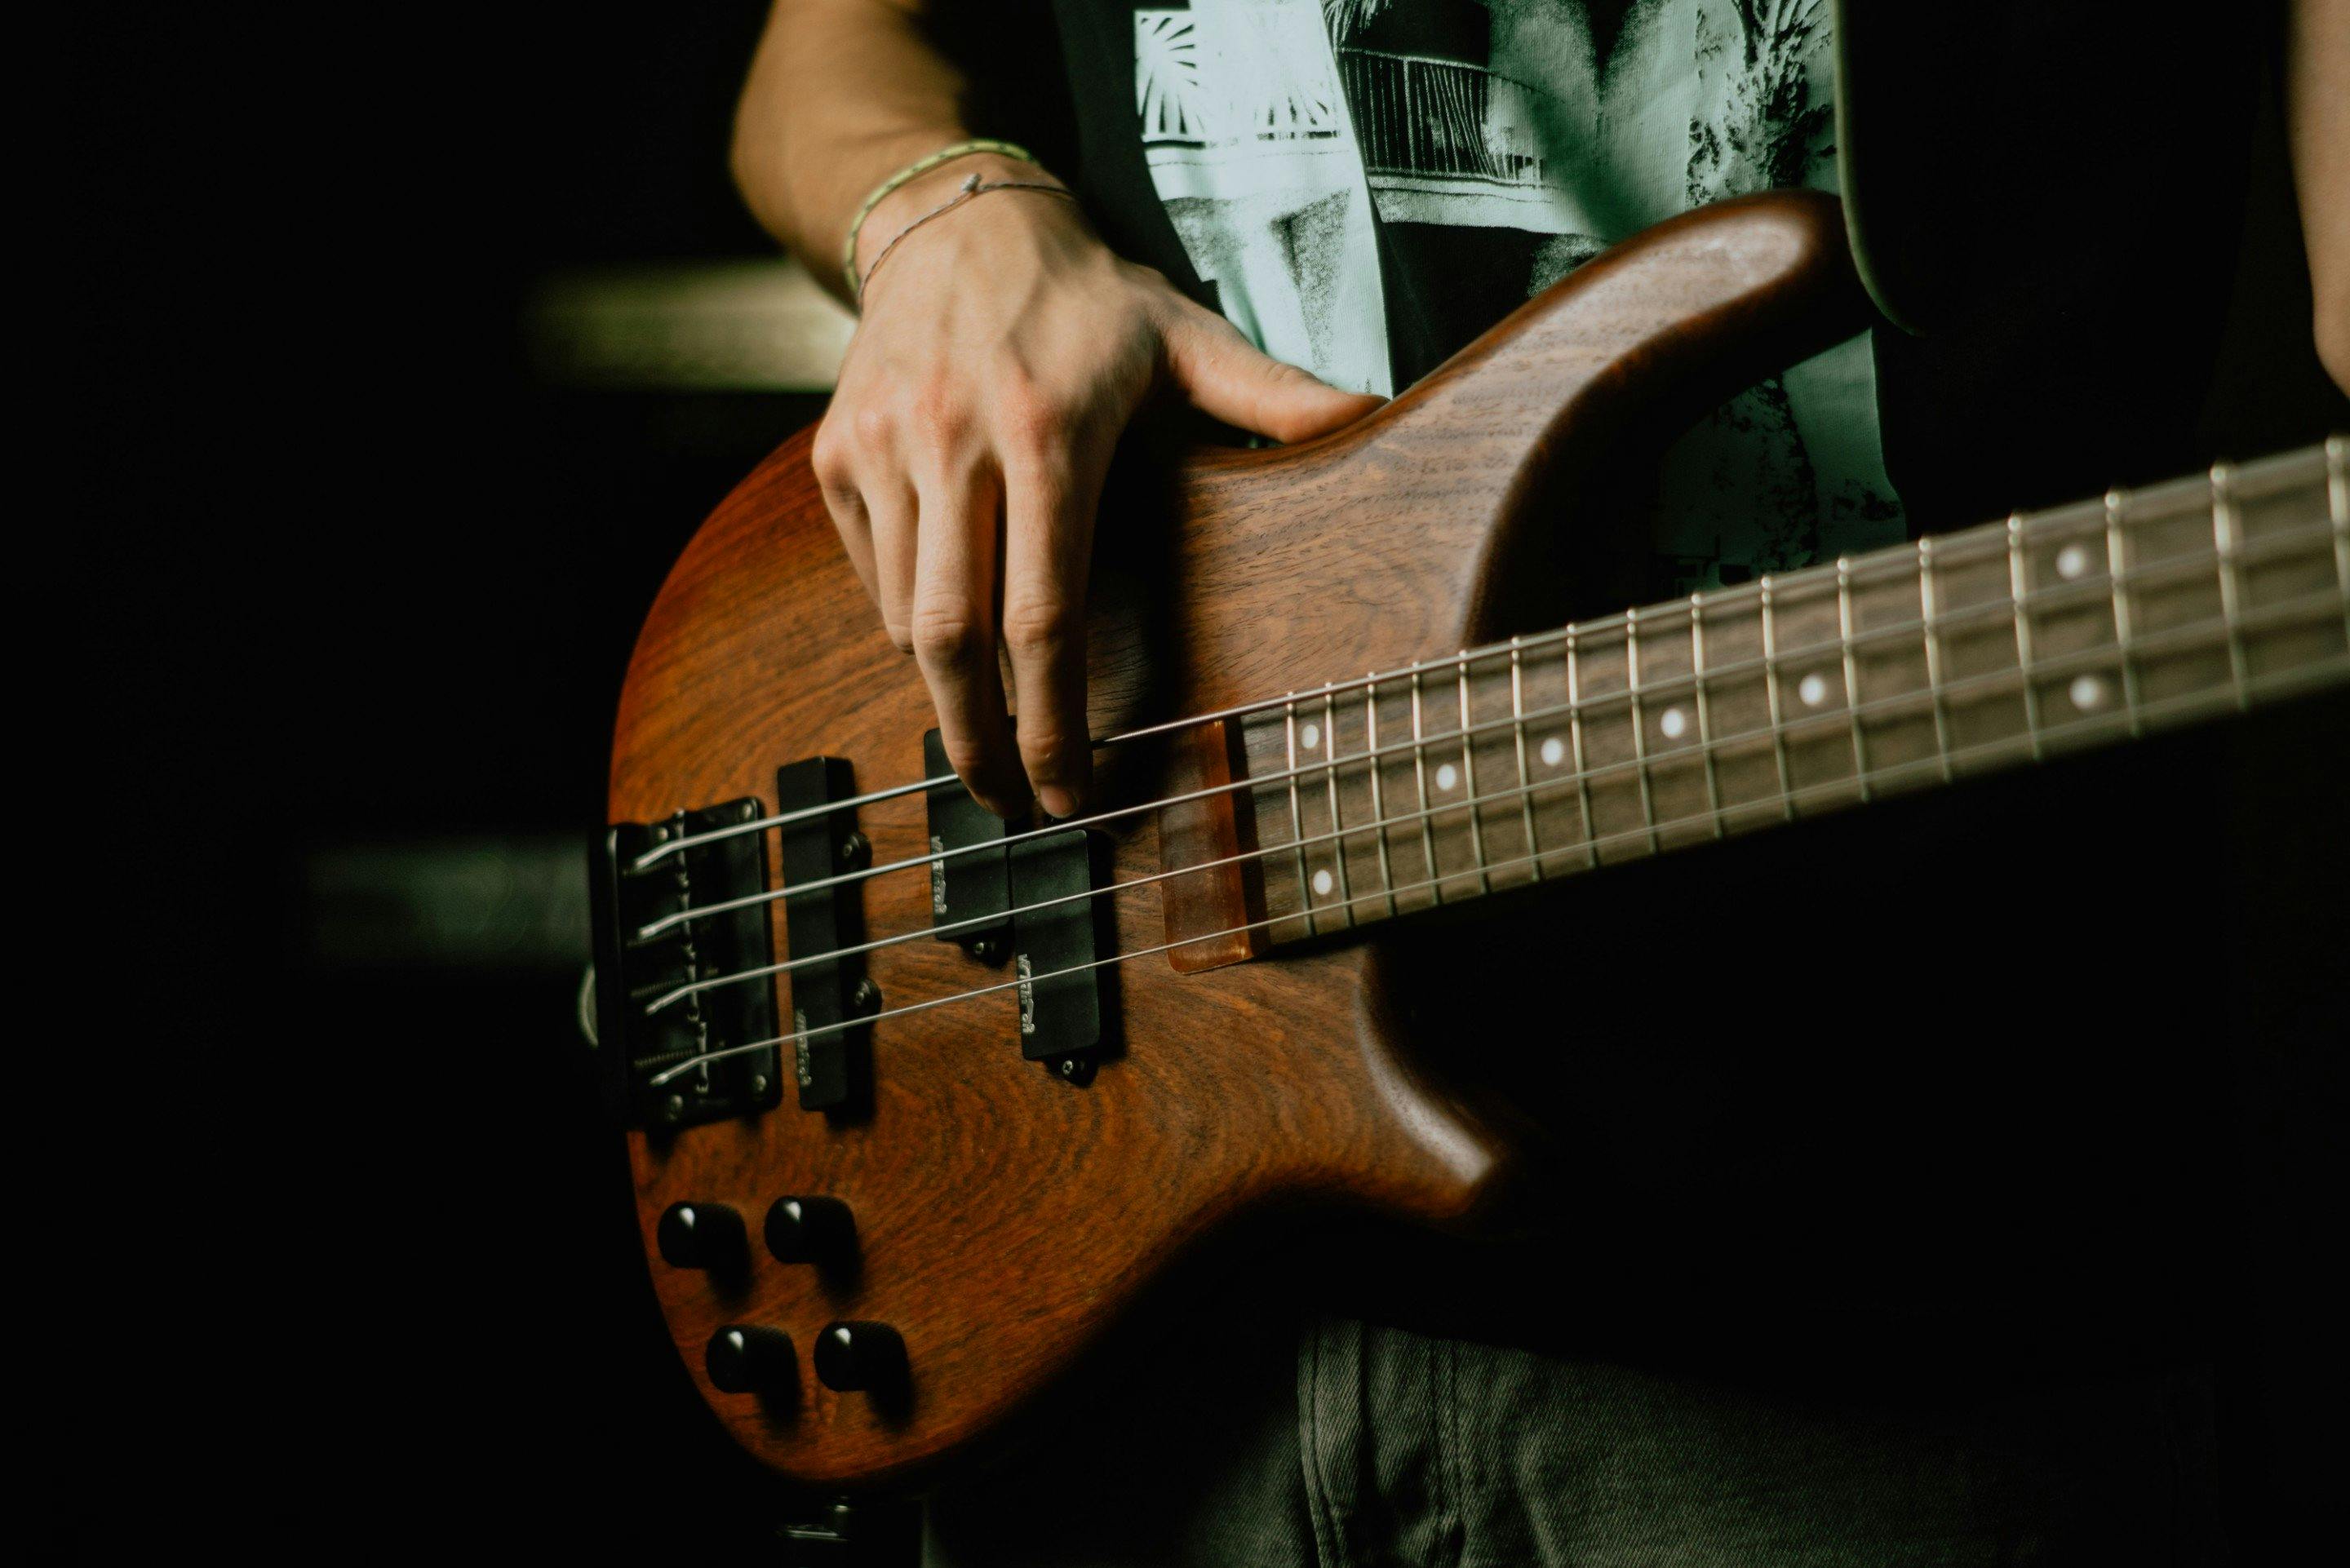 How to get killer slap bass tone | The ultimate guide